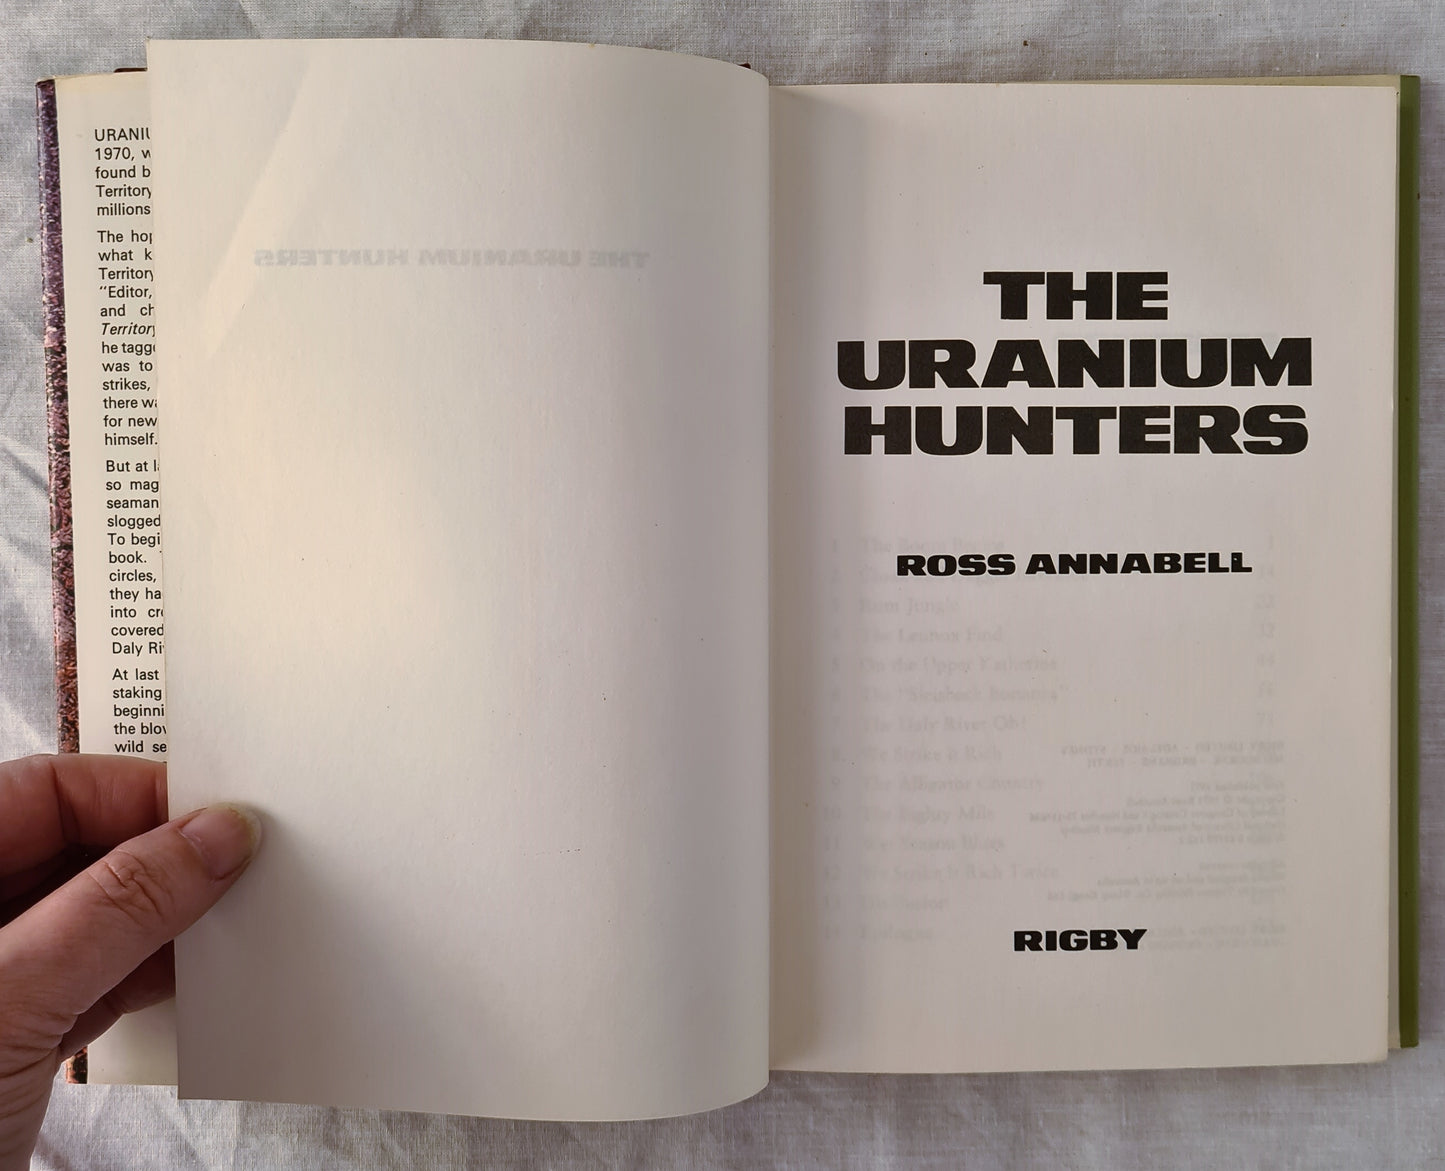 The Uranium Hunters by Ross Annabell